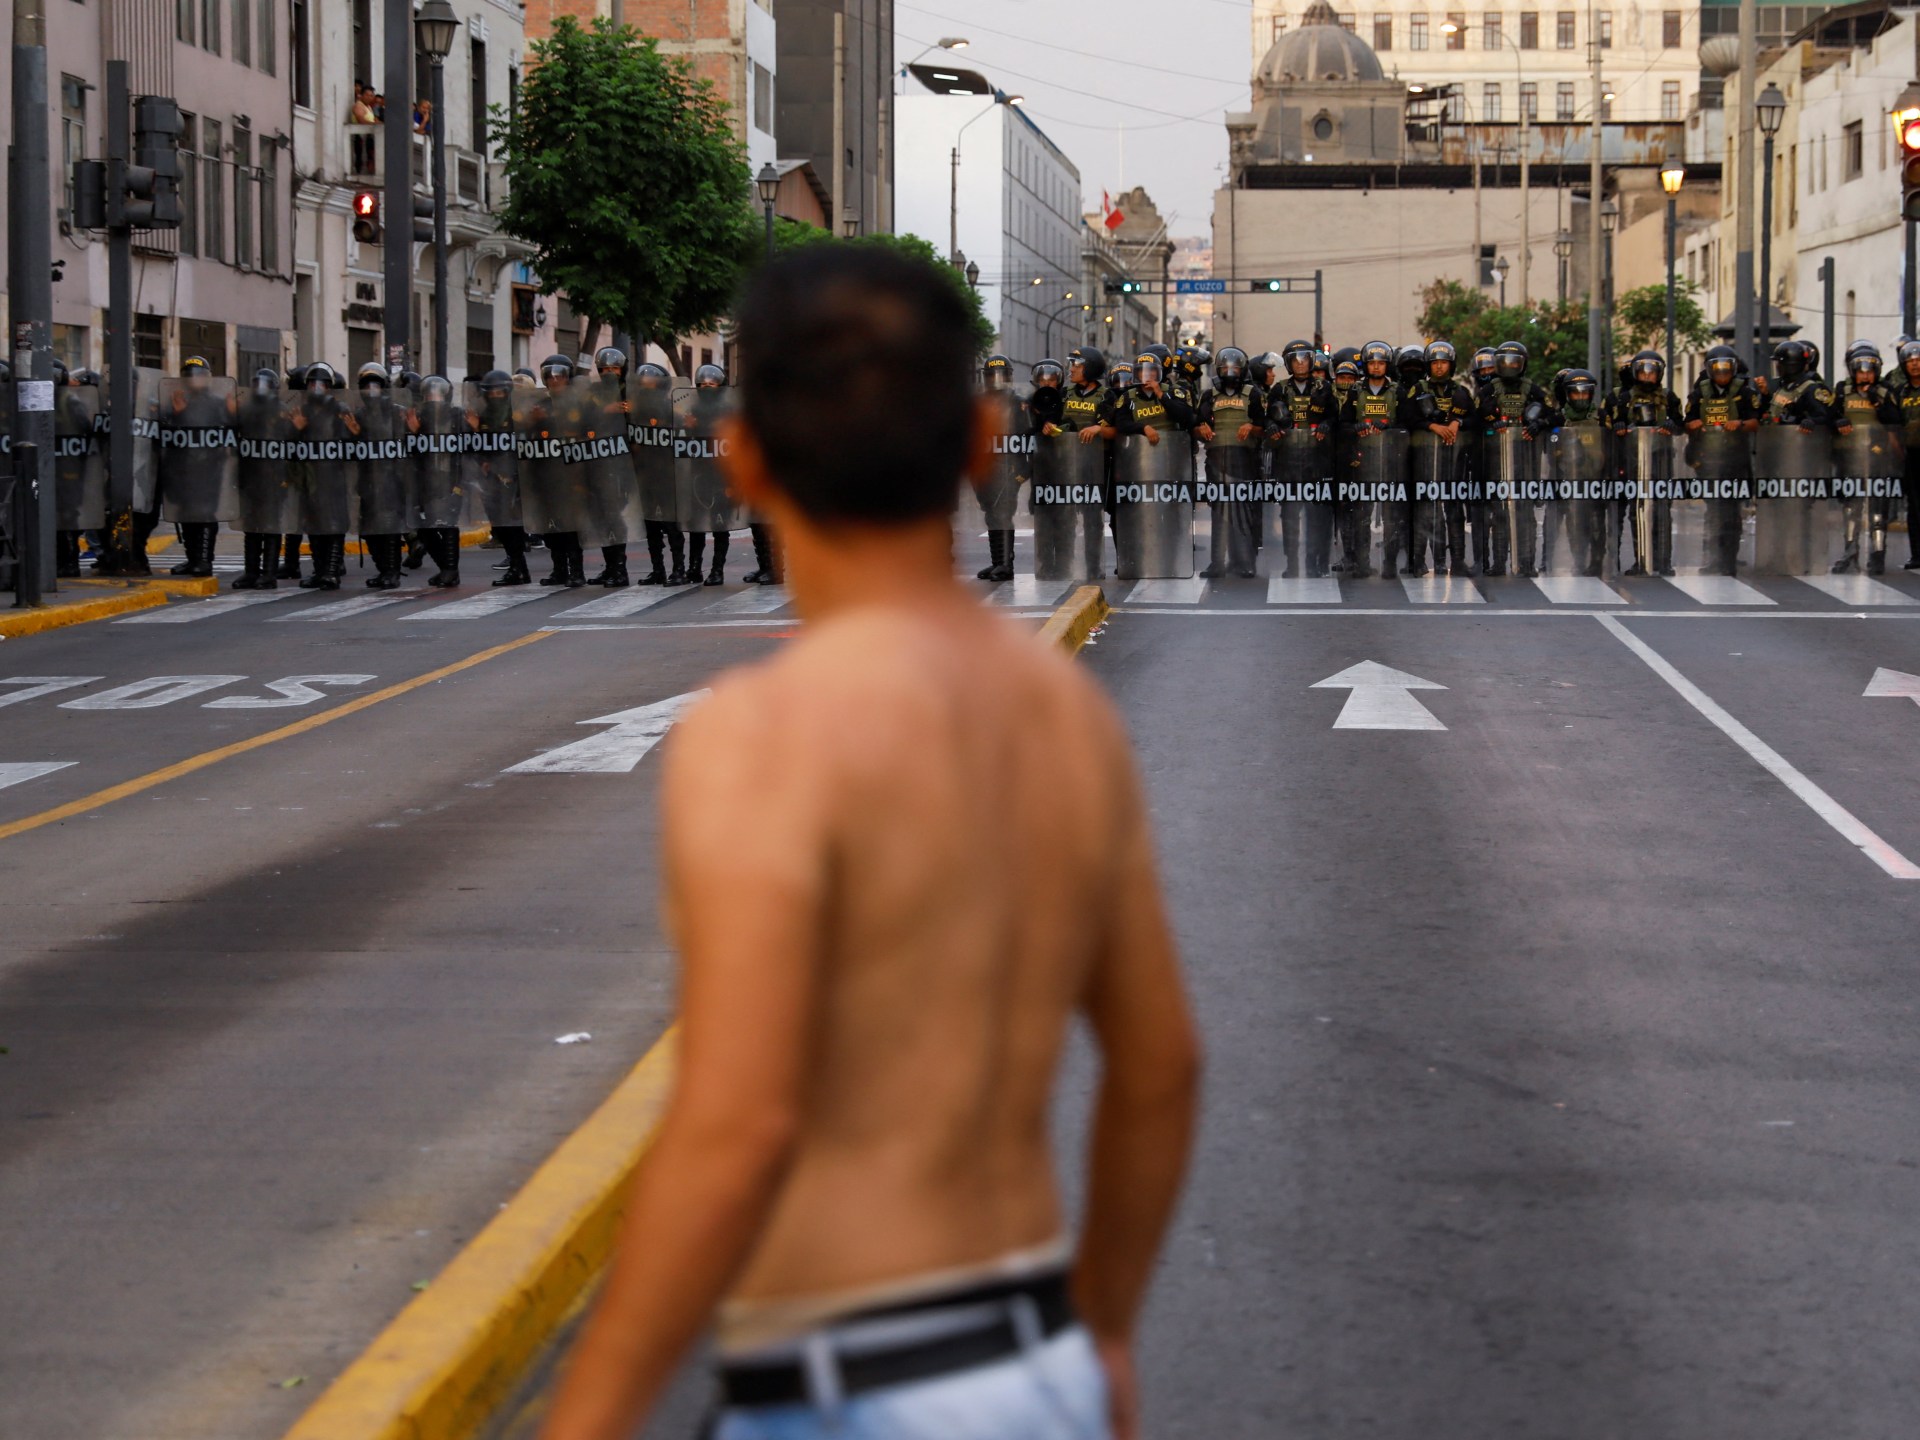 Amnesty report finds racial bias in Peru’s protest crackdown